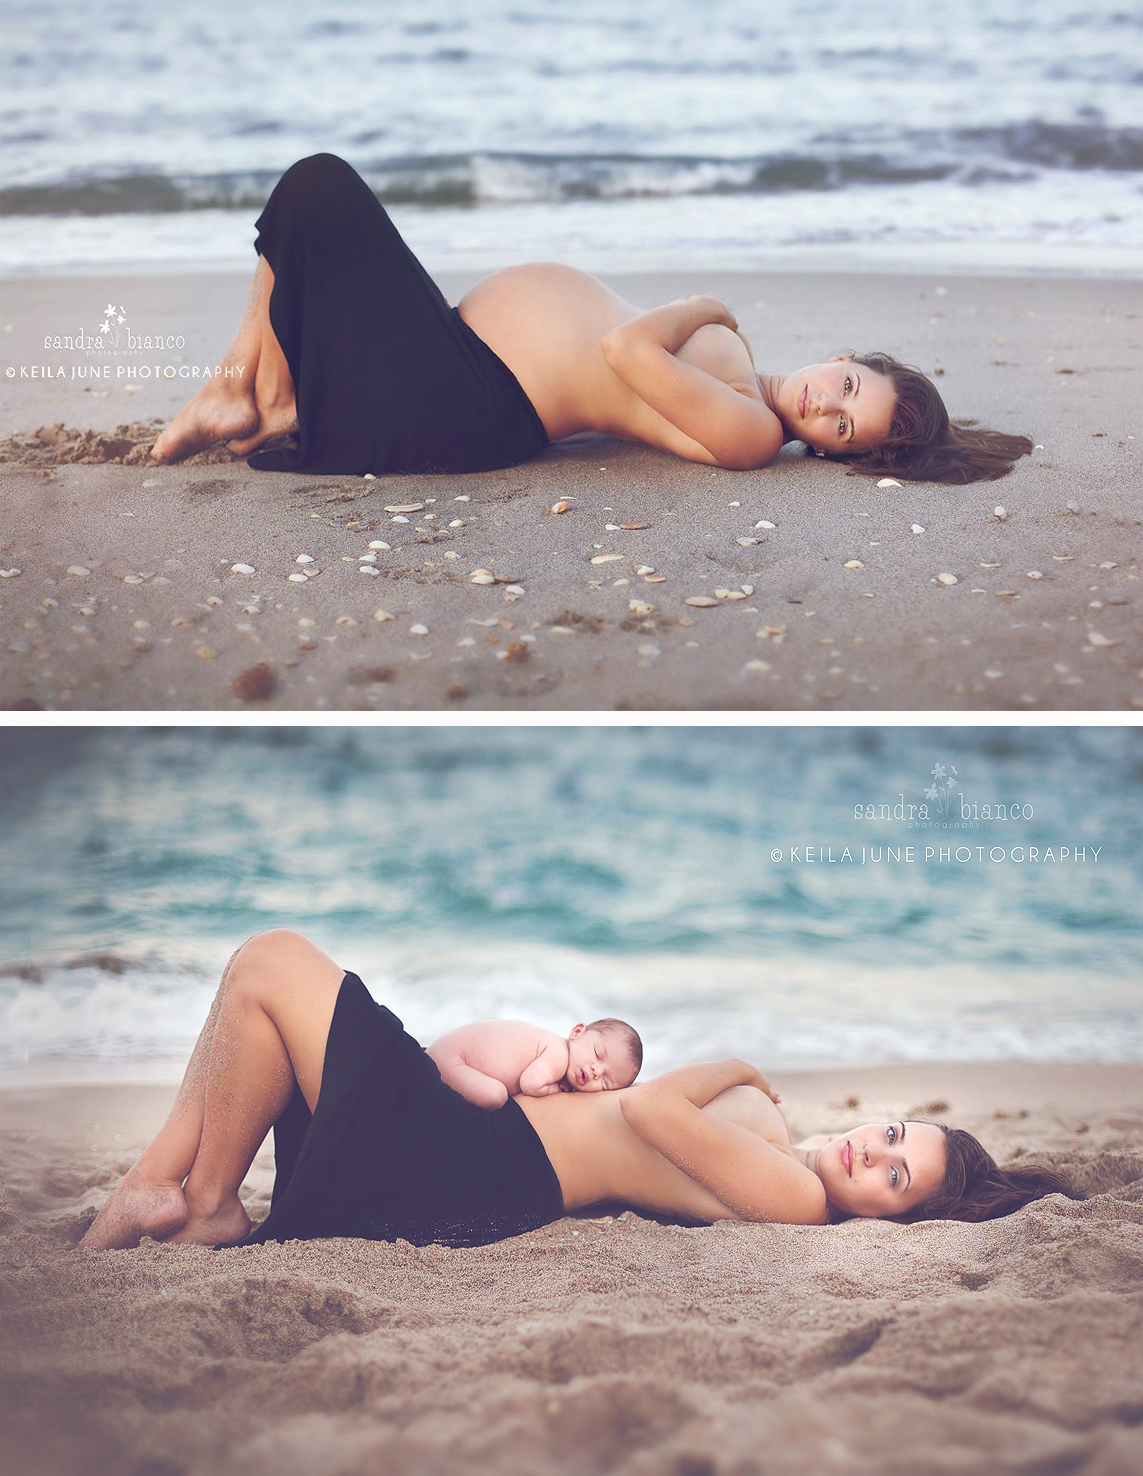 Before and after pregnancy photos, pregnancy photos tips, pregnancy photos method, post baby bellies, creative pregnancy photos, baby photographs, family photos, before and after maternity, post pregnancy photos, celebrity pregnancy photos before and after, post pregnancy belly photos, adorable pics, baby with mom, maternity photography, newborn photography, photography ideas, photography